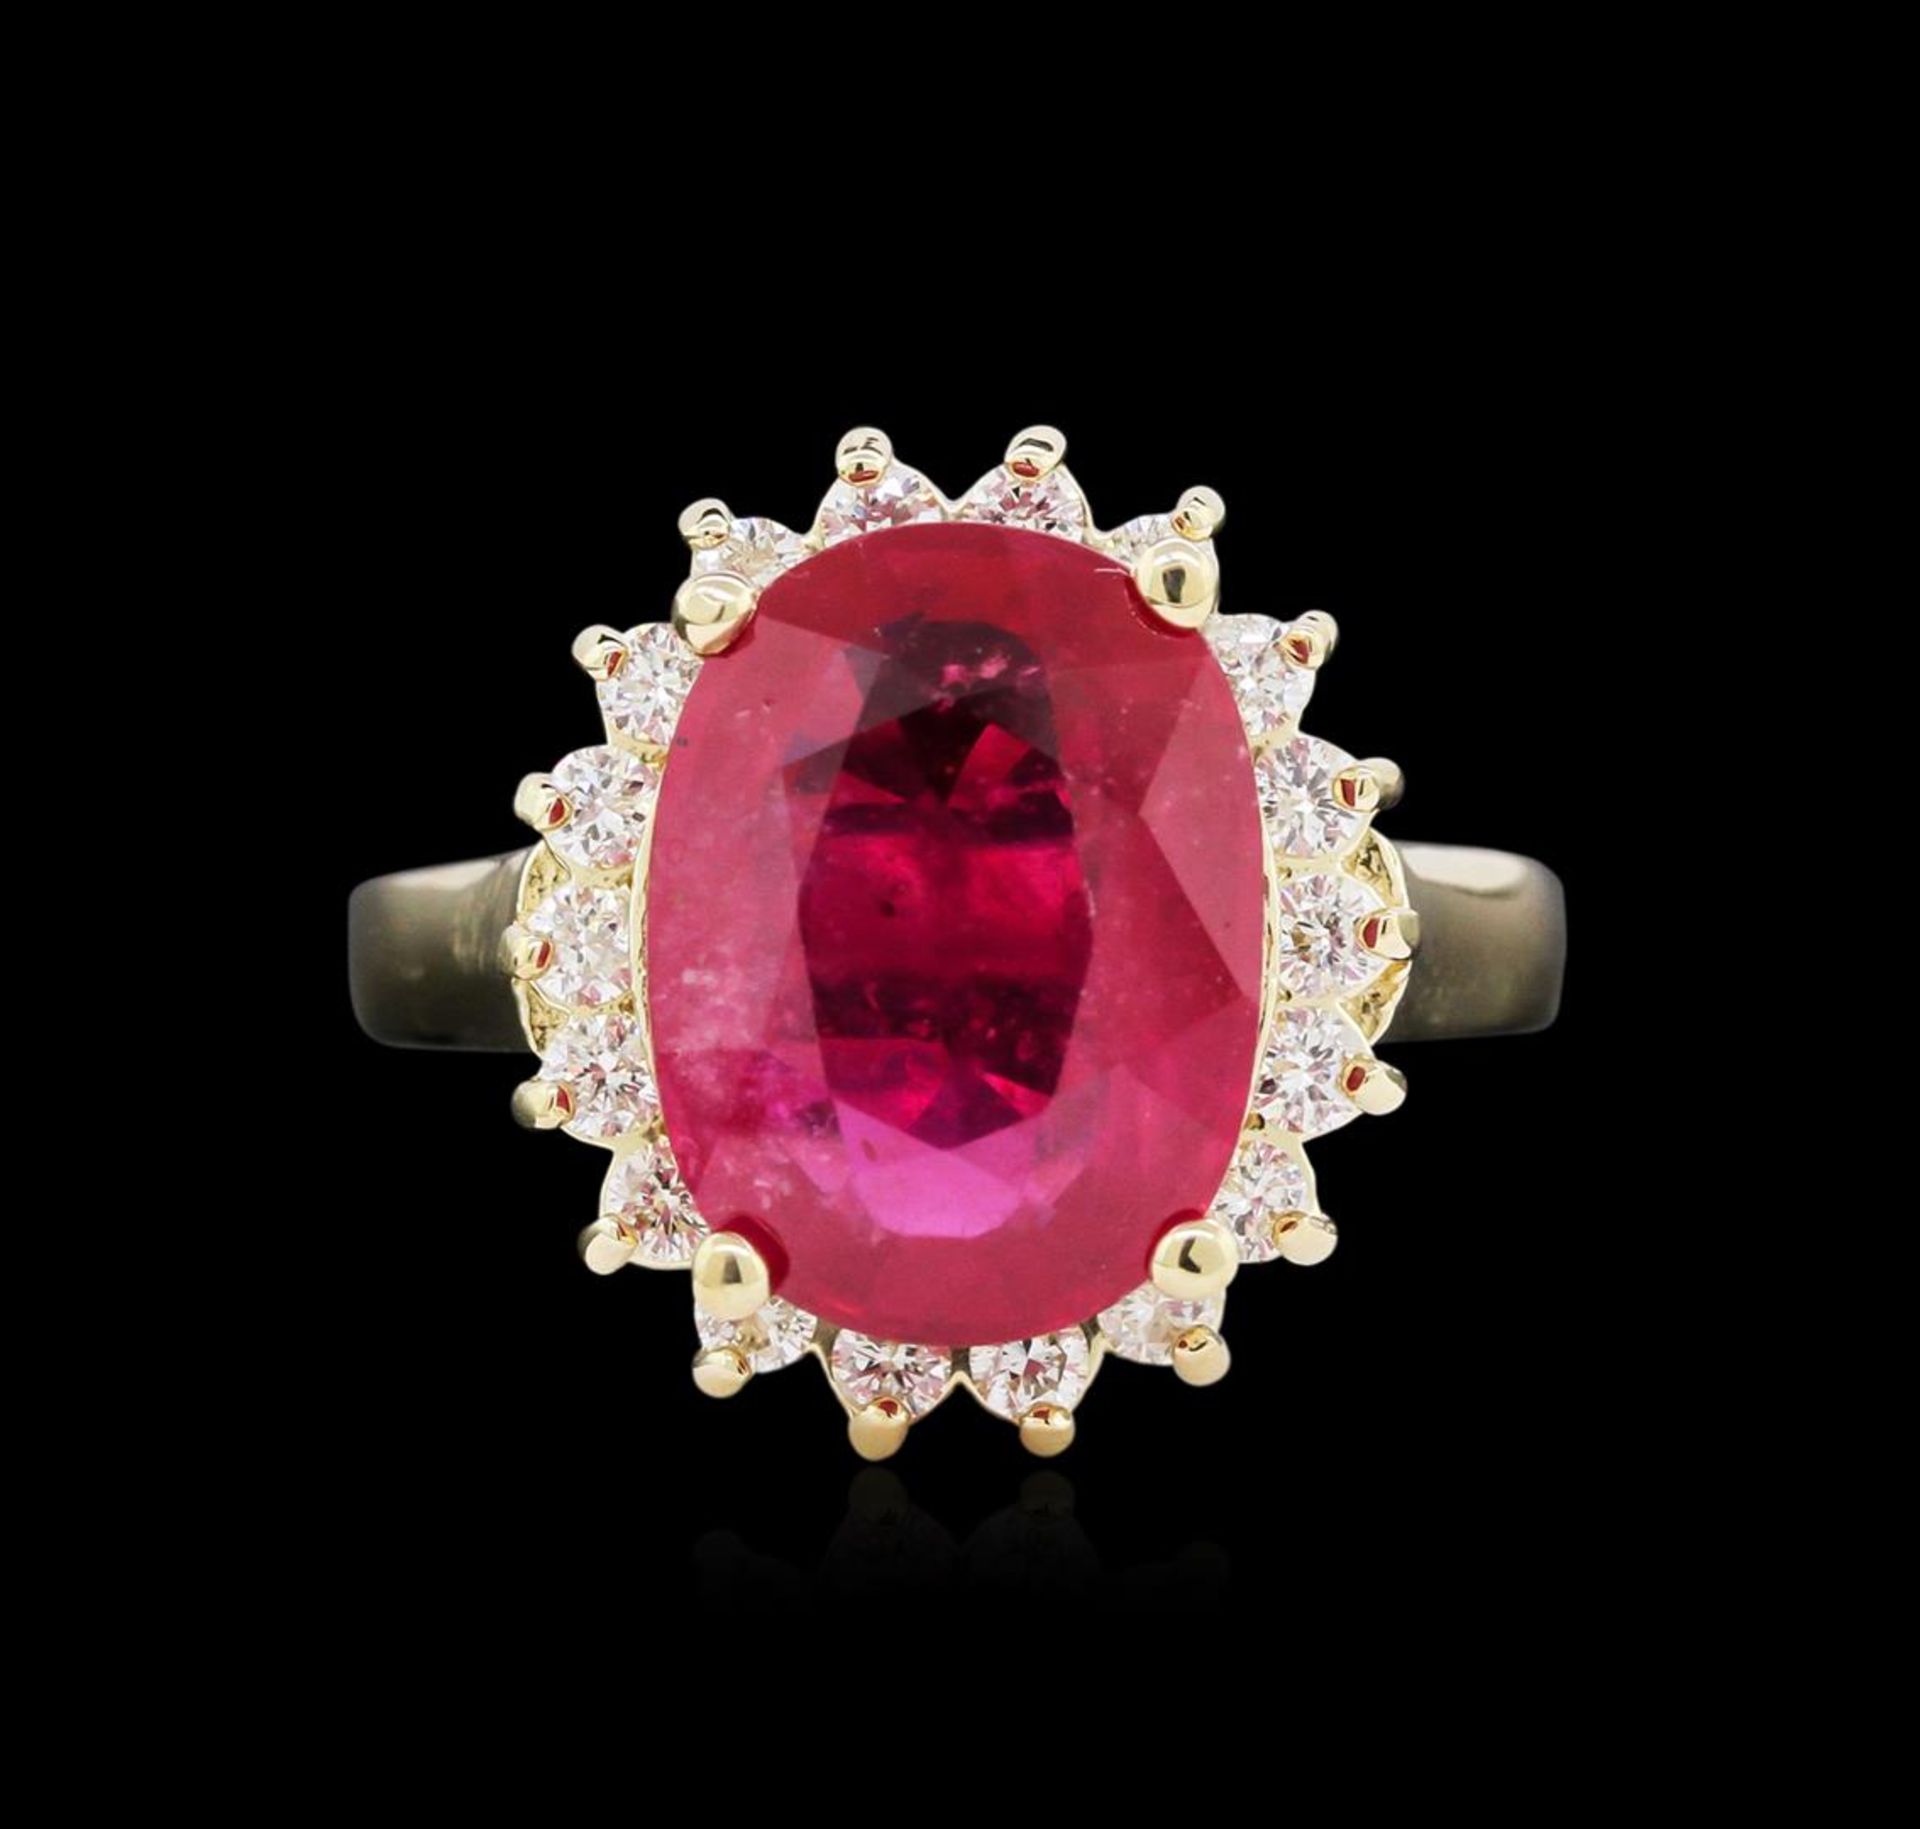 6.50 ctw Ruby and Diamond Ring - 14KT Yellow Gold - Image 2 of 3